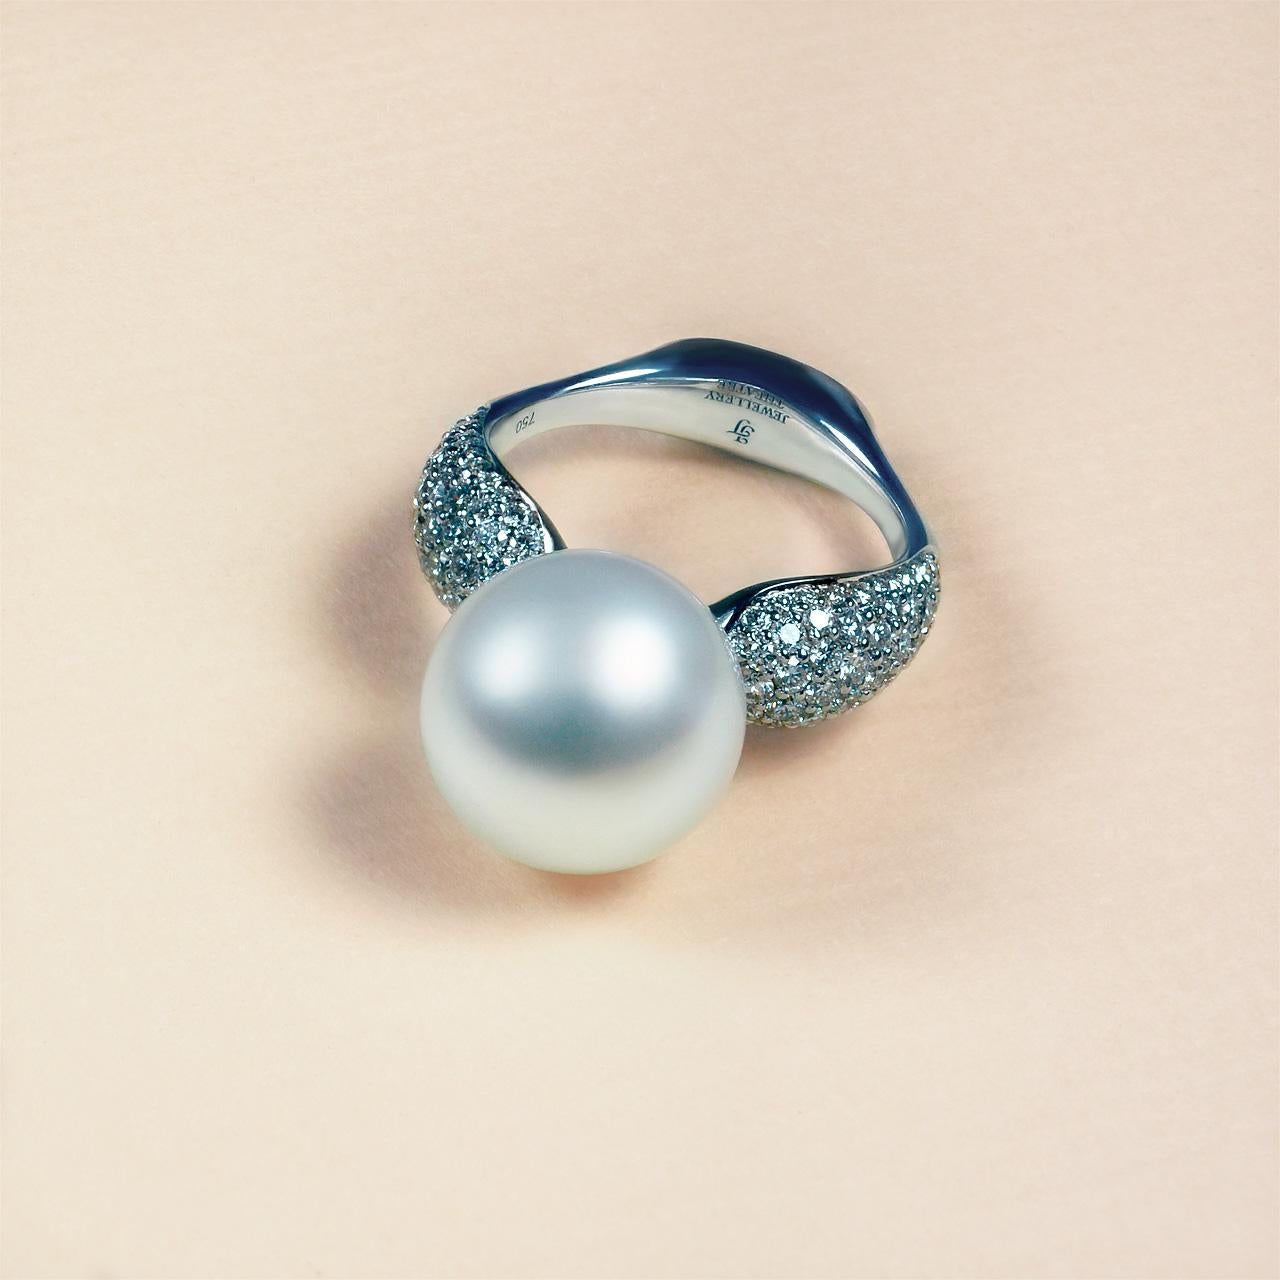 - 138 Round Diamonds – 1.05 ct, G/ VVS1-VVS2
- 12.1 mm White South Sea pearl
- 18K White Gold 
- Weight: 6.37 g
- Size: 16 mm
This fabulous ring with the beautiful lustrous White South Sea Pearl 12.1 mm with diamond pave setting is made of 18K White